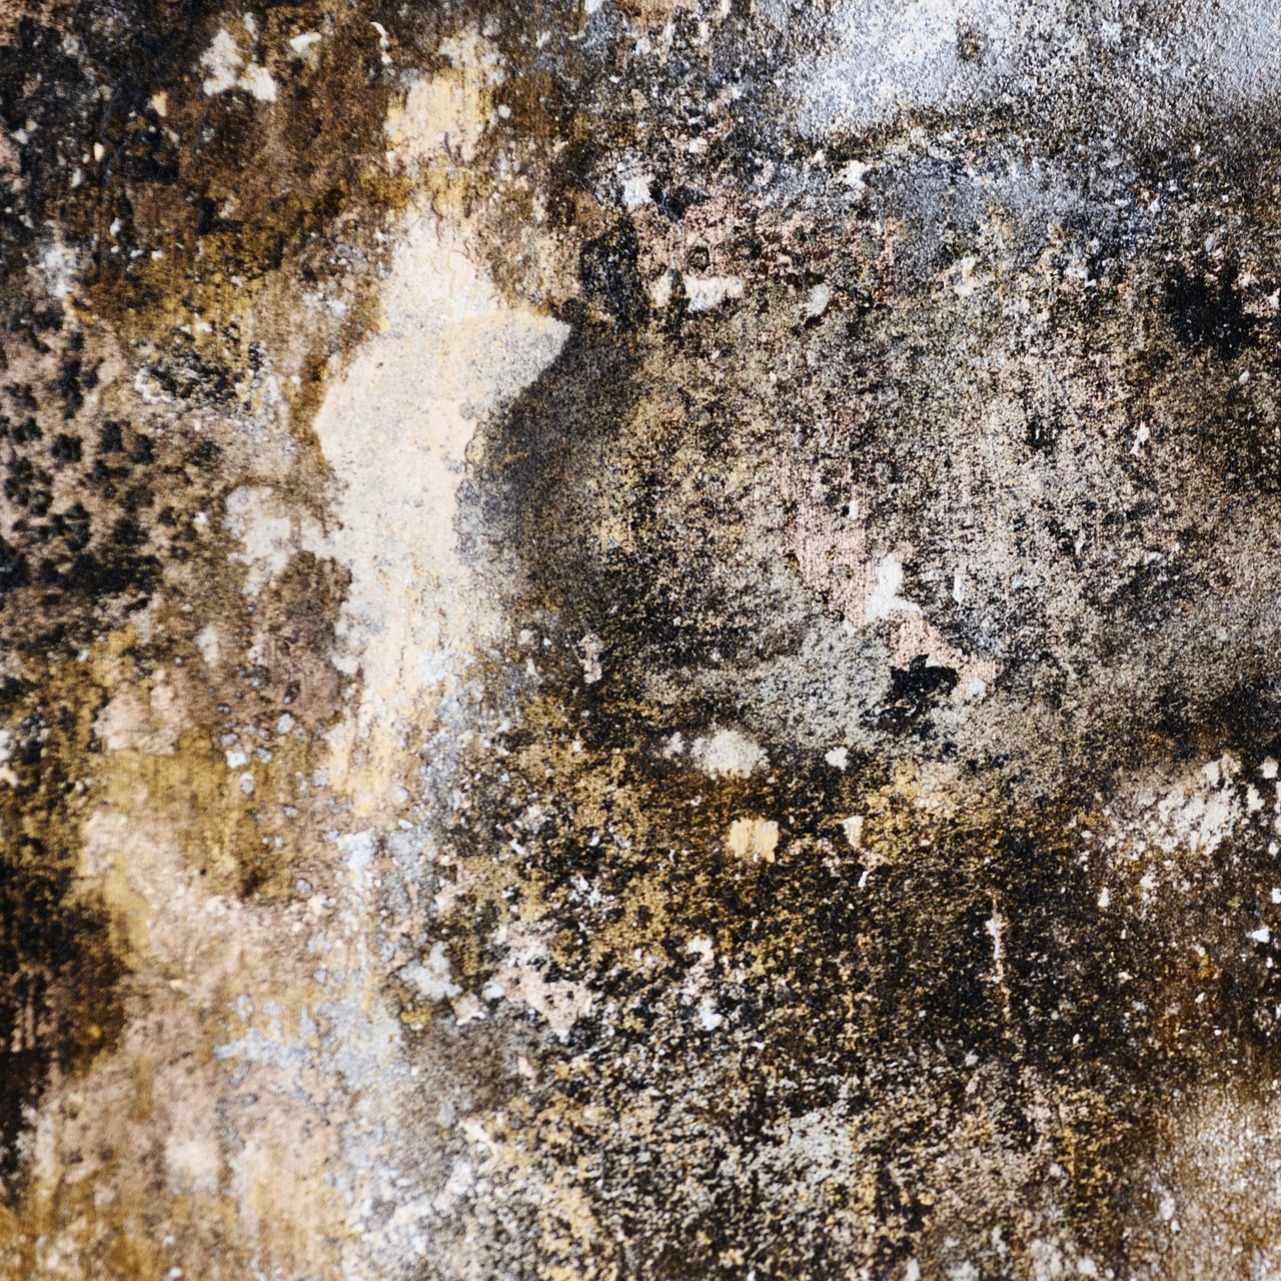 A close up of mould growth on wall.